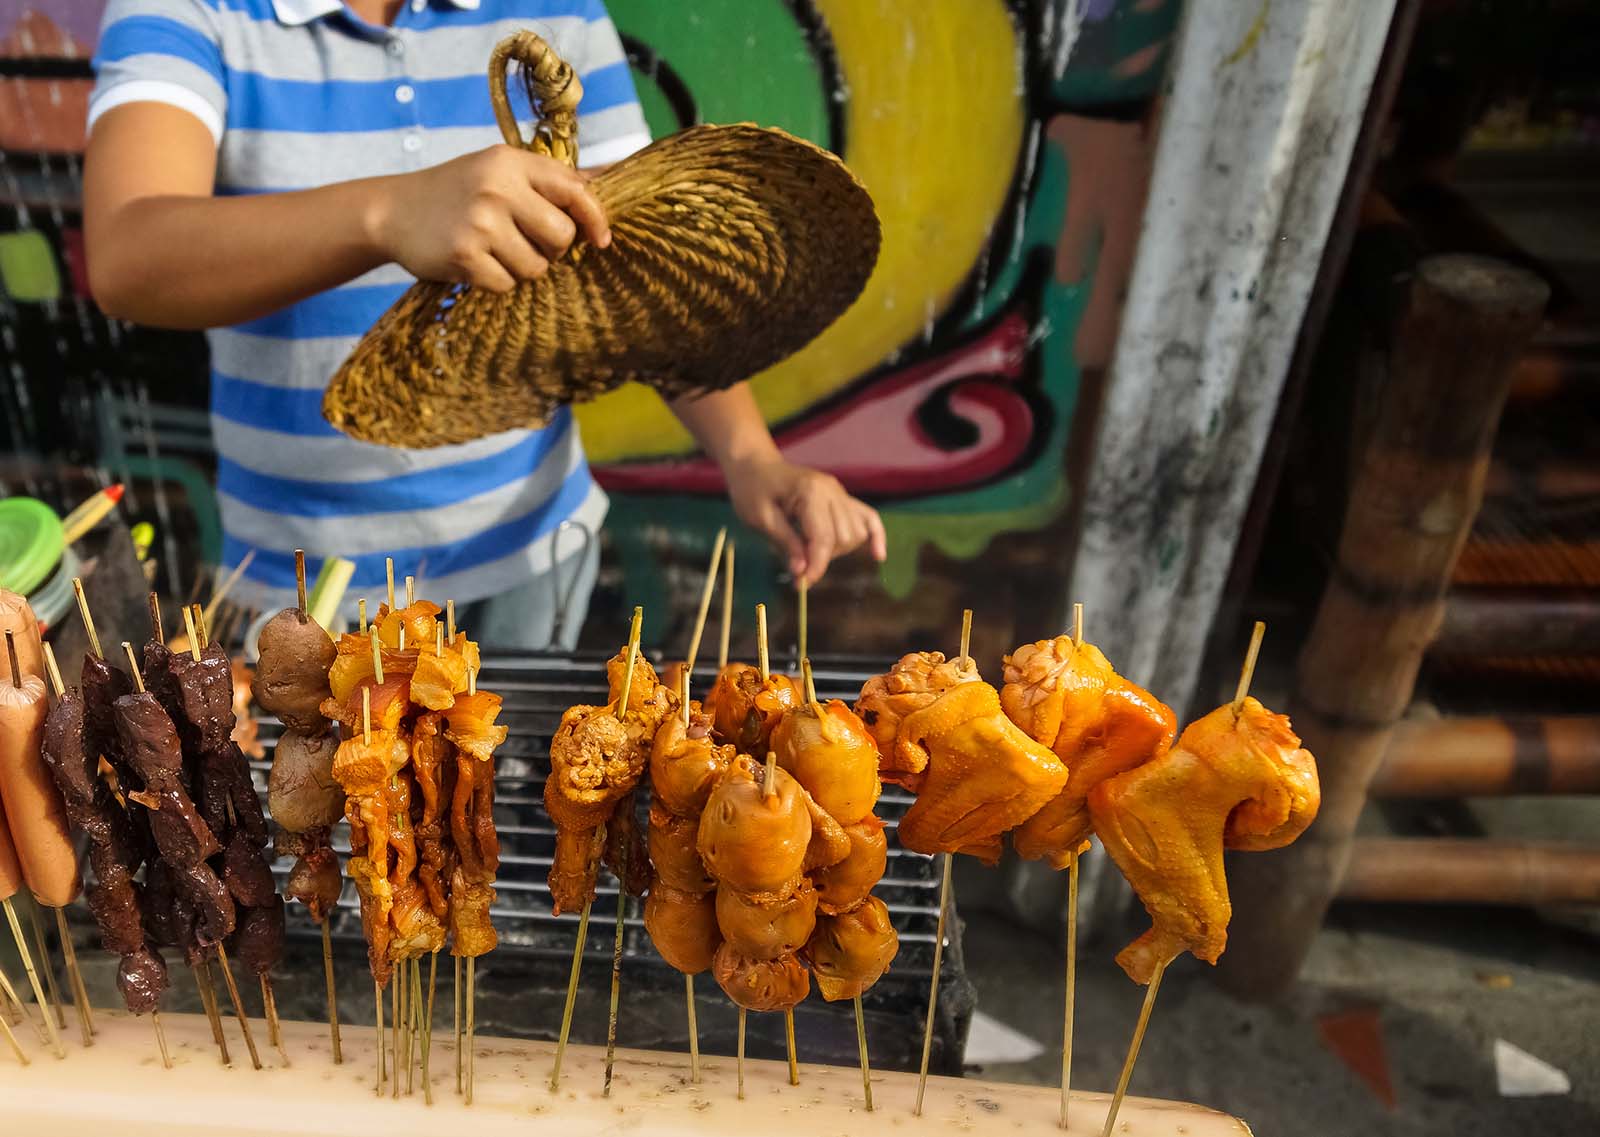 Trying street food and local delicacies in Manila | Manila: The Pearl of the Orient